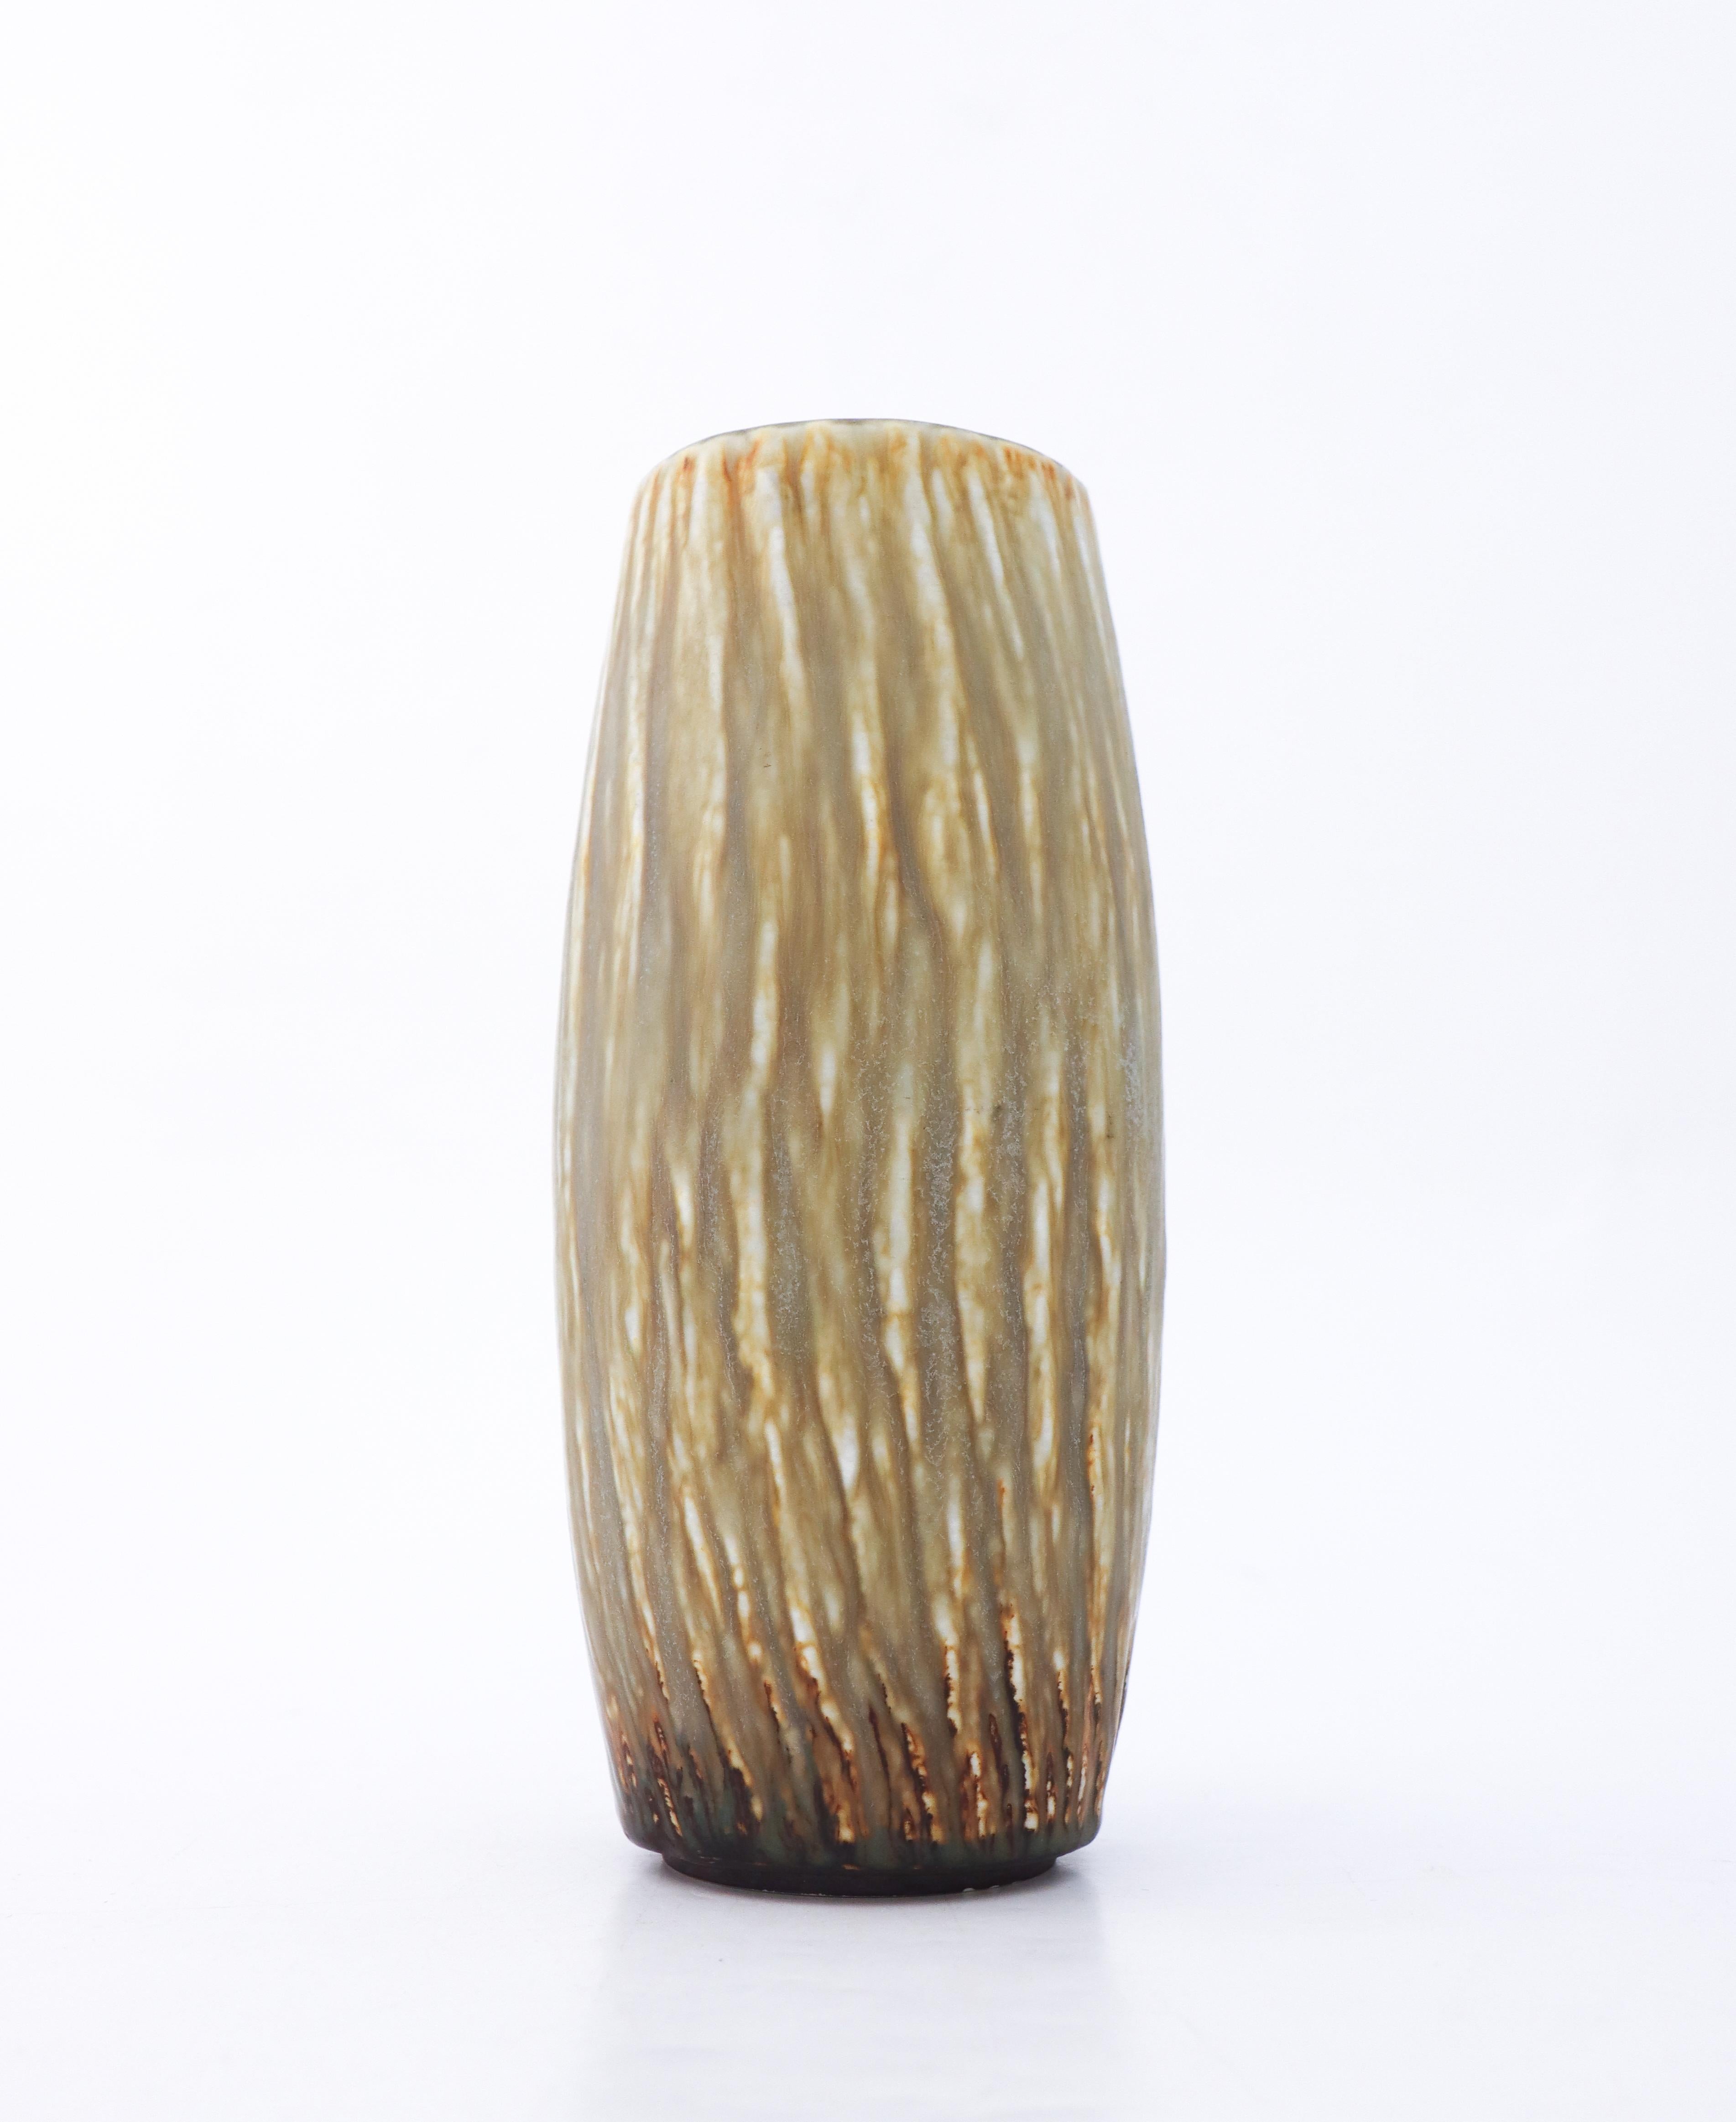 A stoneware vase in the Rubus-serie designed by Gunnar Nylund at Rörstrand, it is 22.5 cm (9